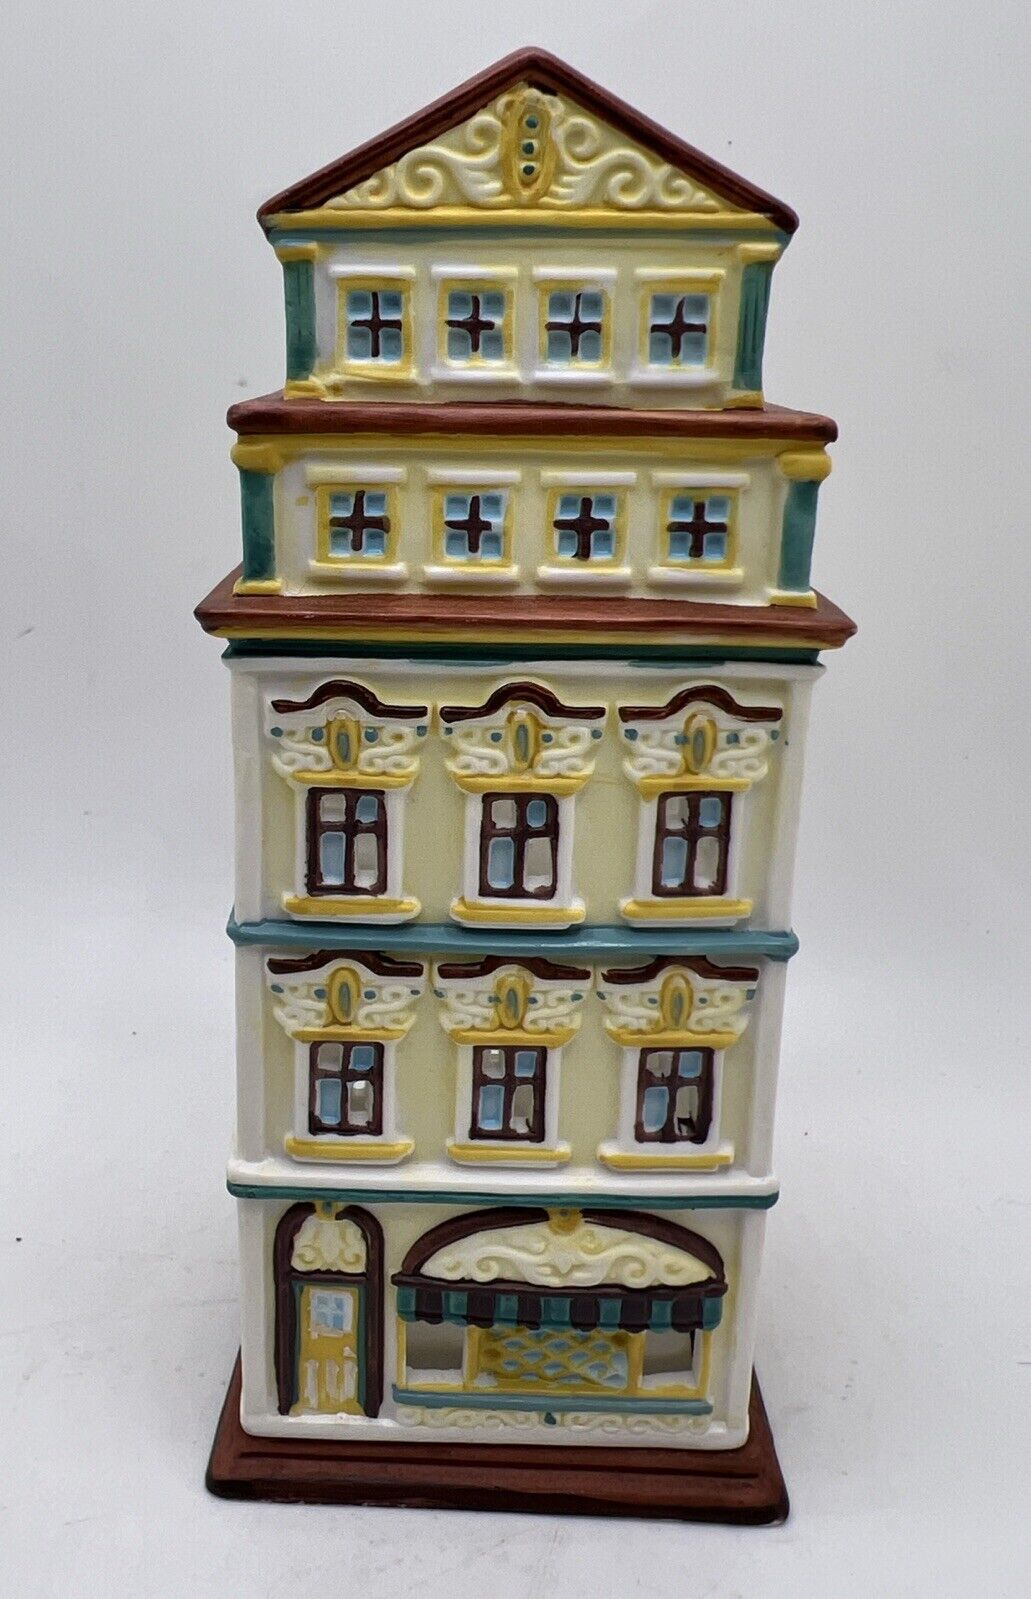 Partylite Cafe Amsterdam Tealight House P8275 5 Story Ceramic Collectible